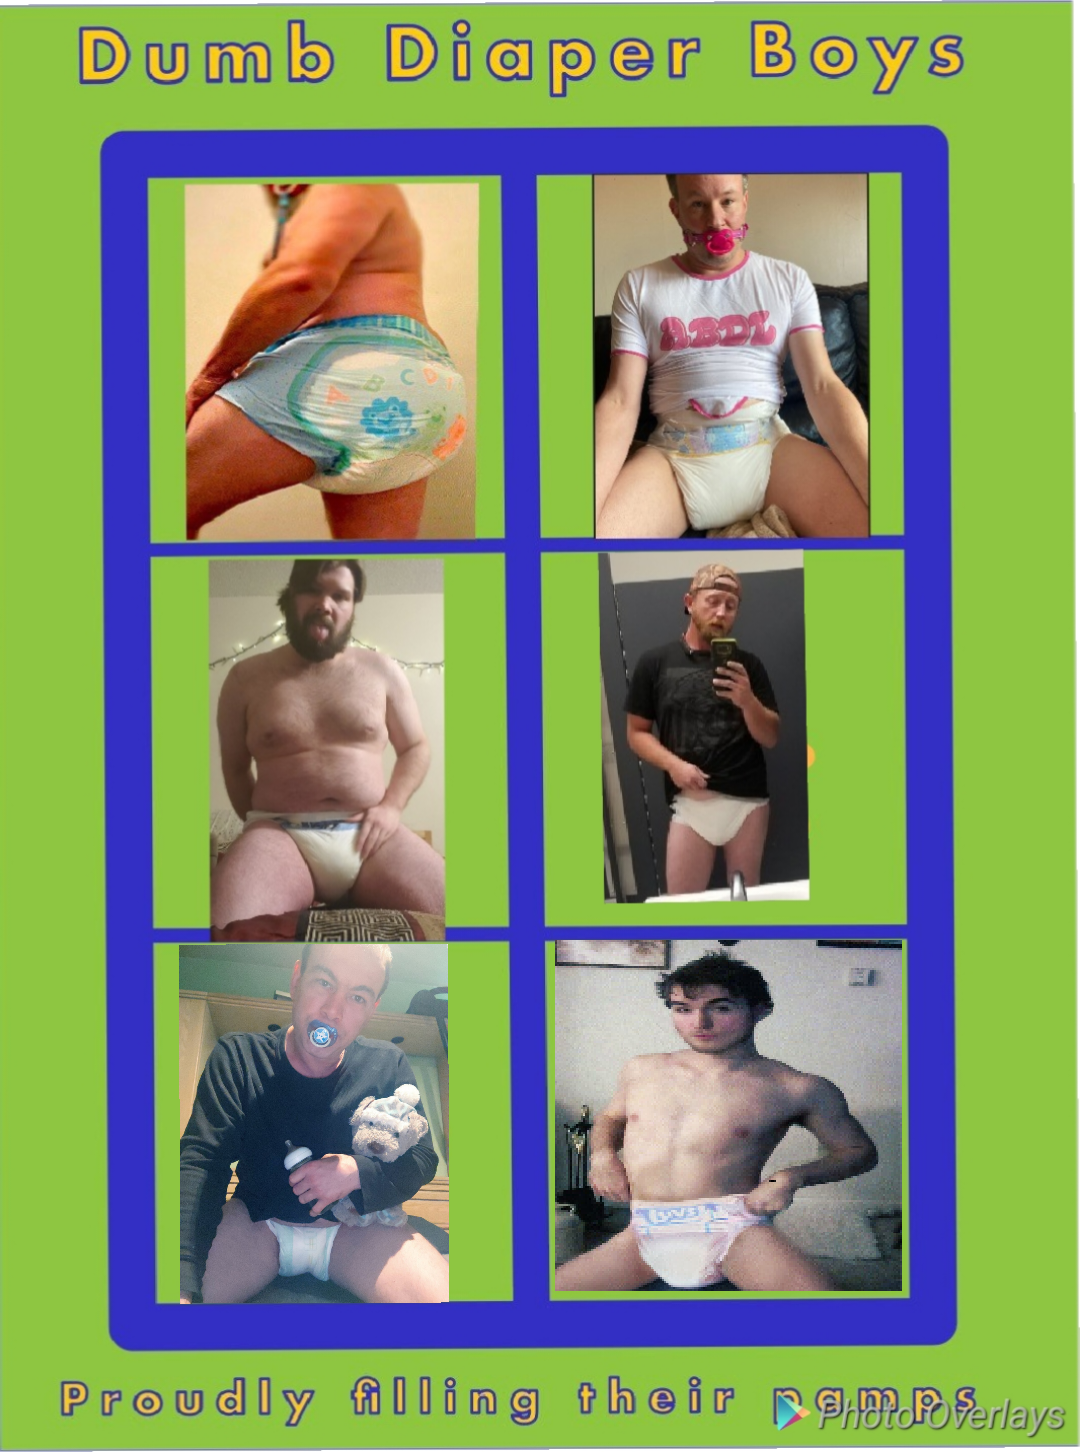 Diaper f*g collages